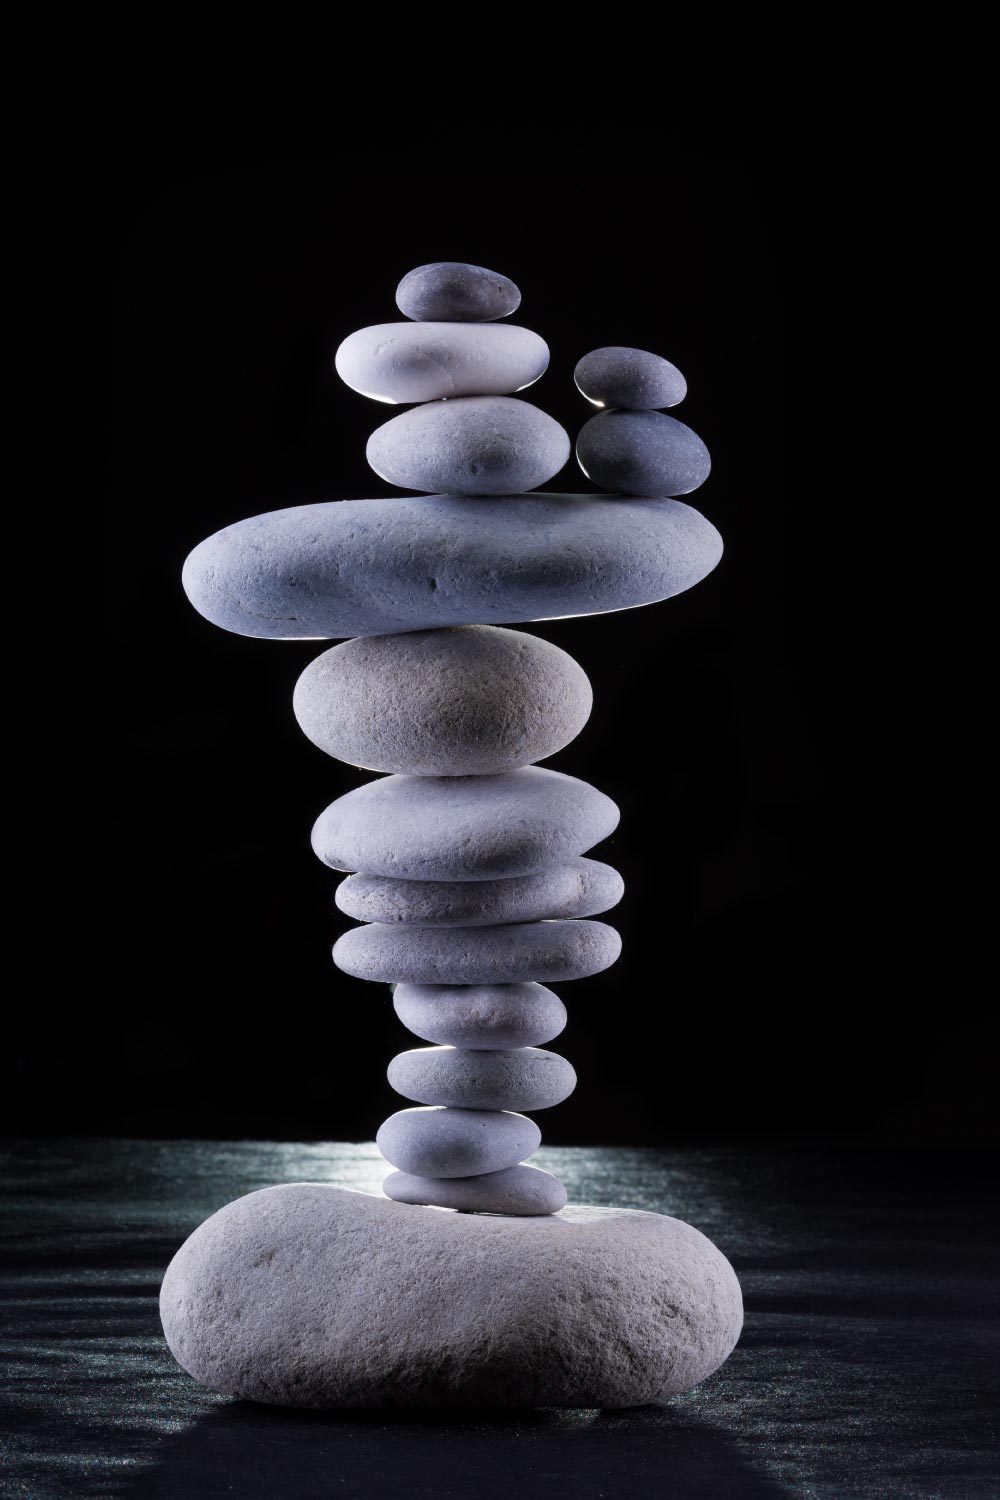 Different sized rocks stacked in balance